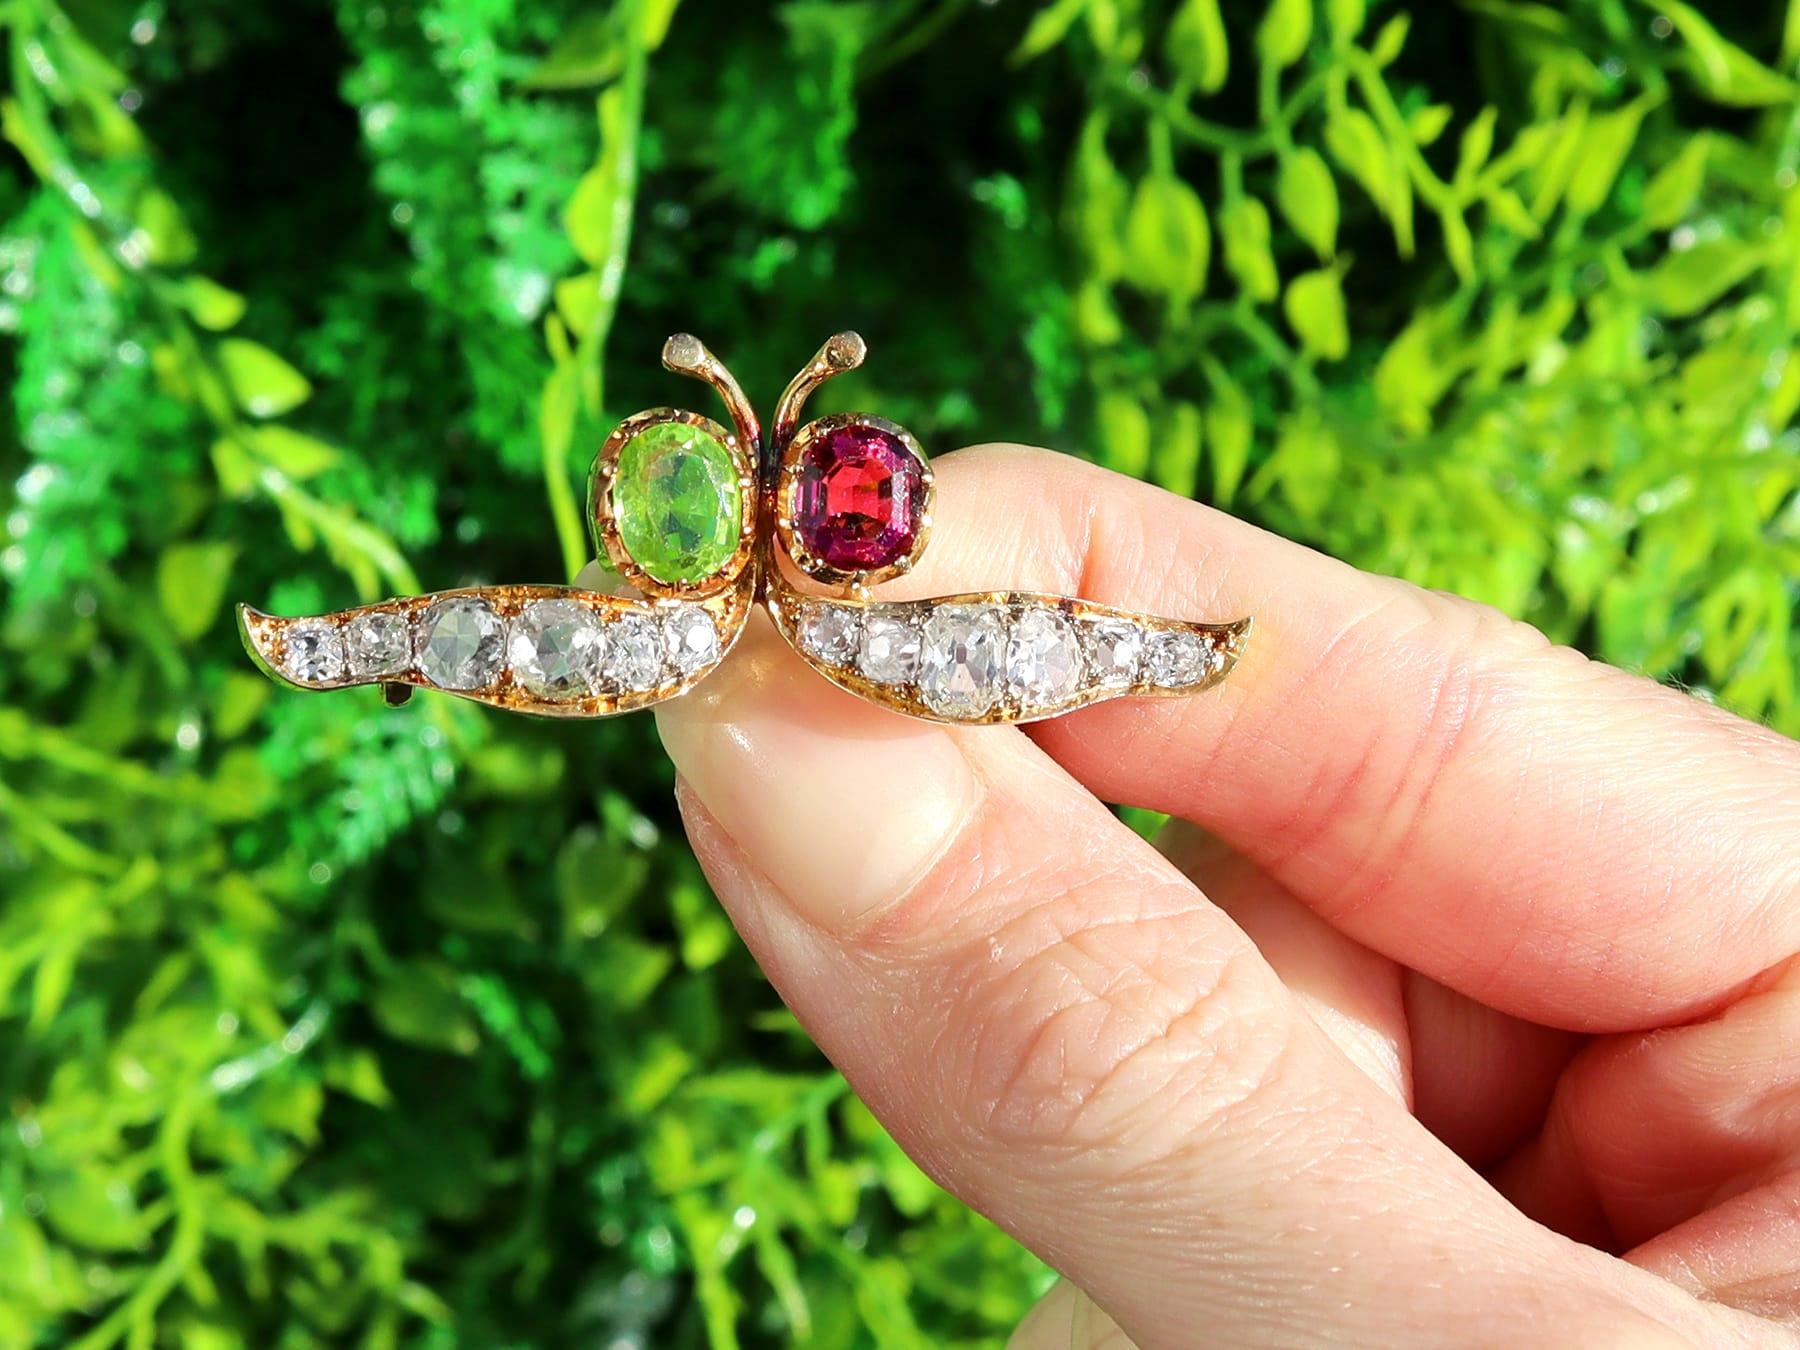 A stunning Victorian 1.23 carat kunzite and 1.12 carat peridot, 2.96 carat diamond and 18 karat yellow gold brooch; part of our diverse antique jewelry collections.

This stunning, fine and impressive antique brooch has been crafted in 18k yellow